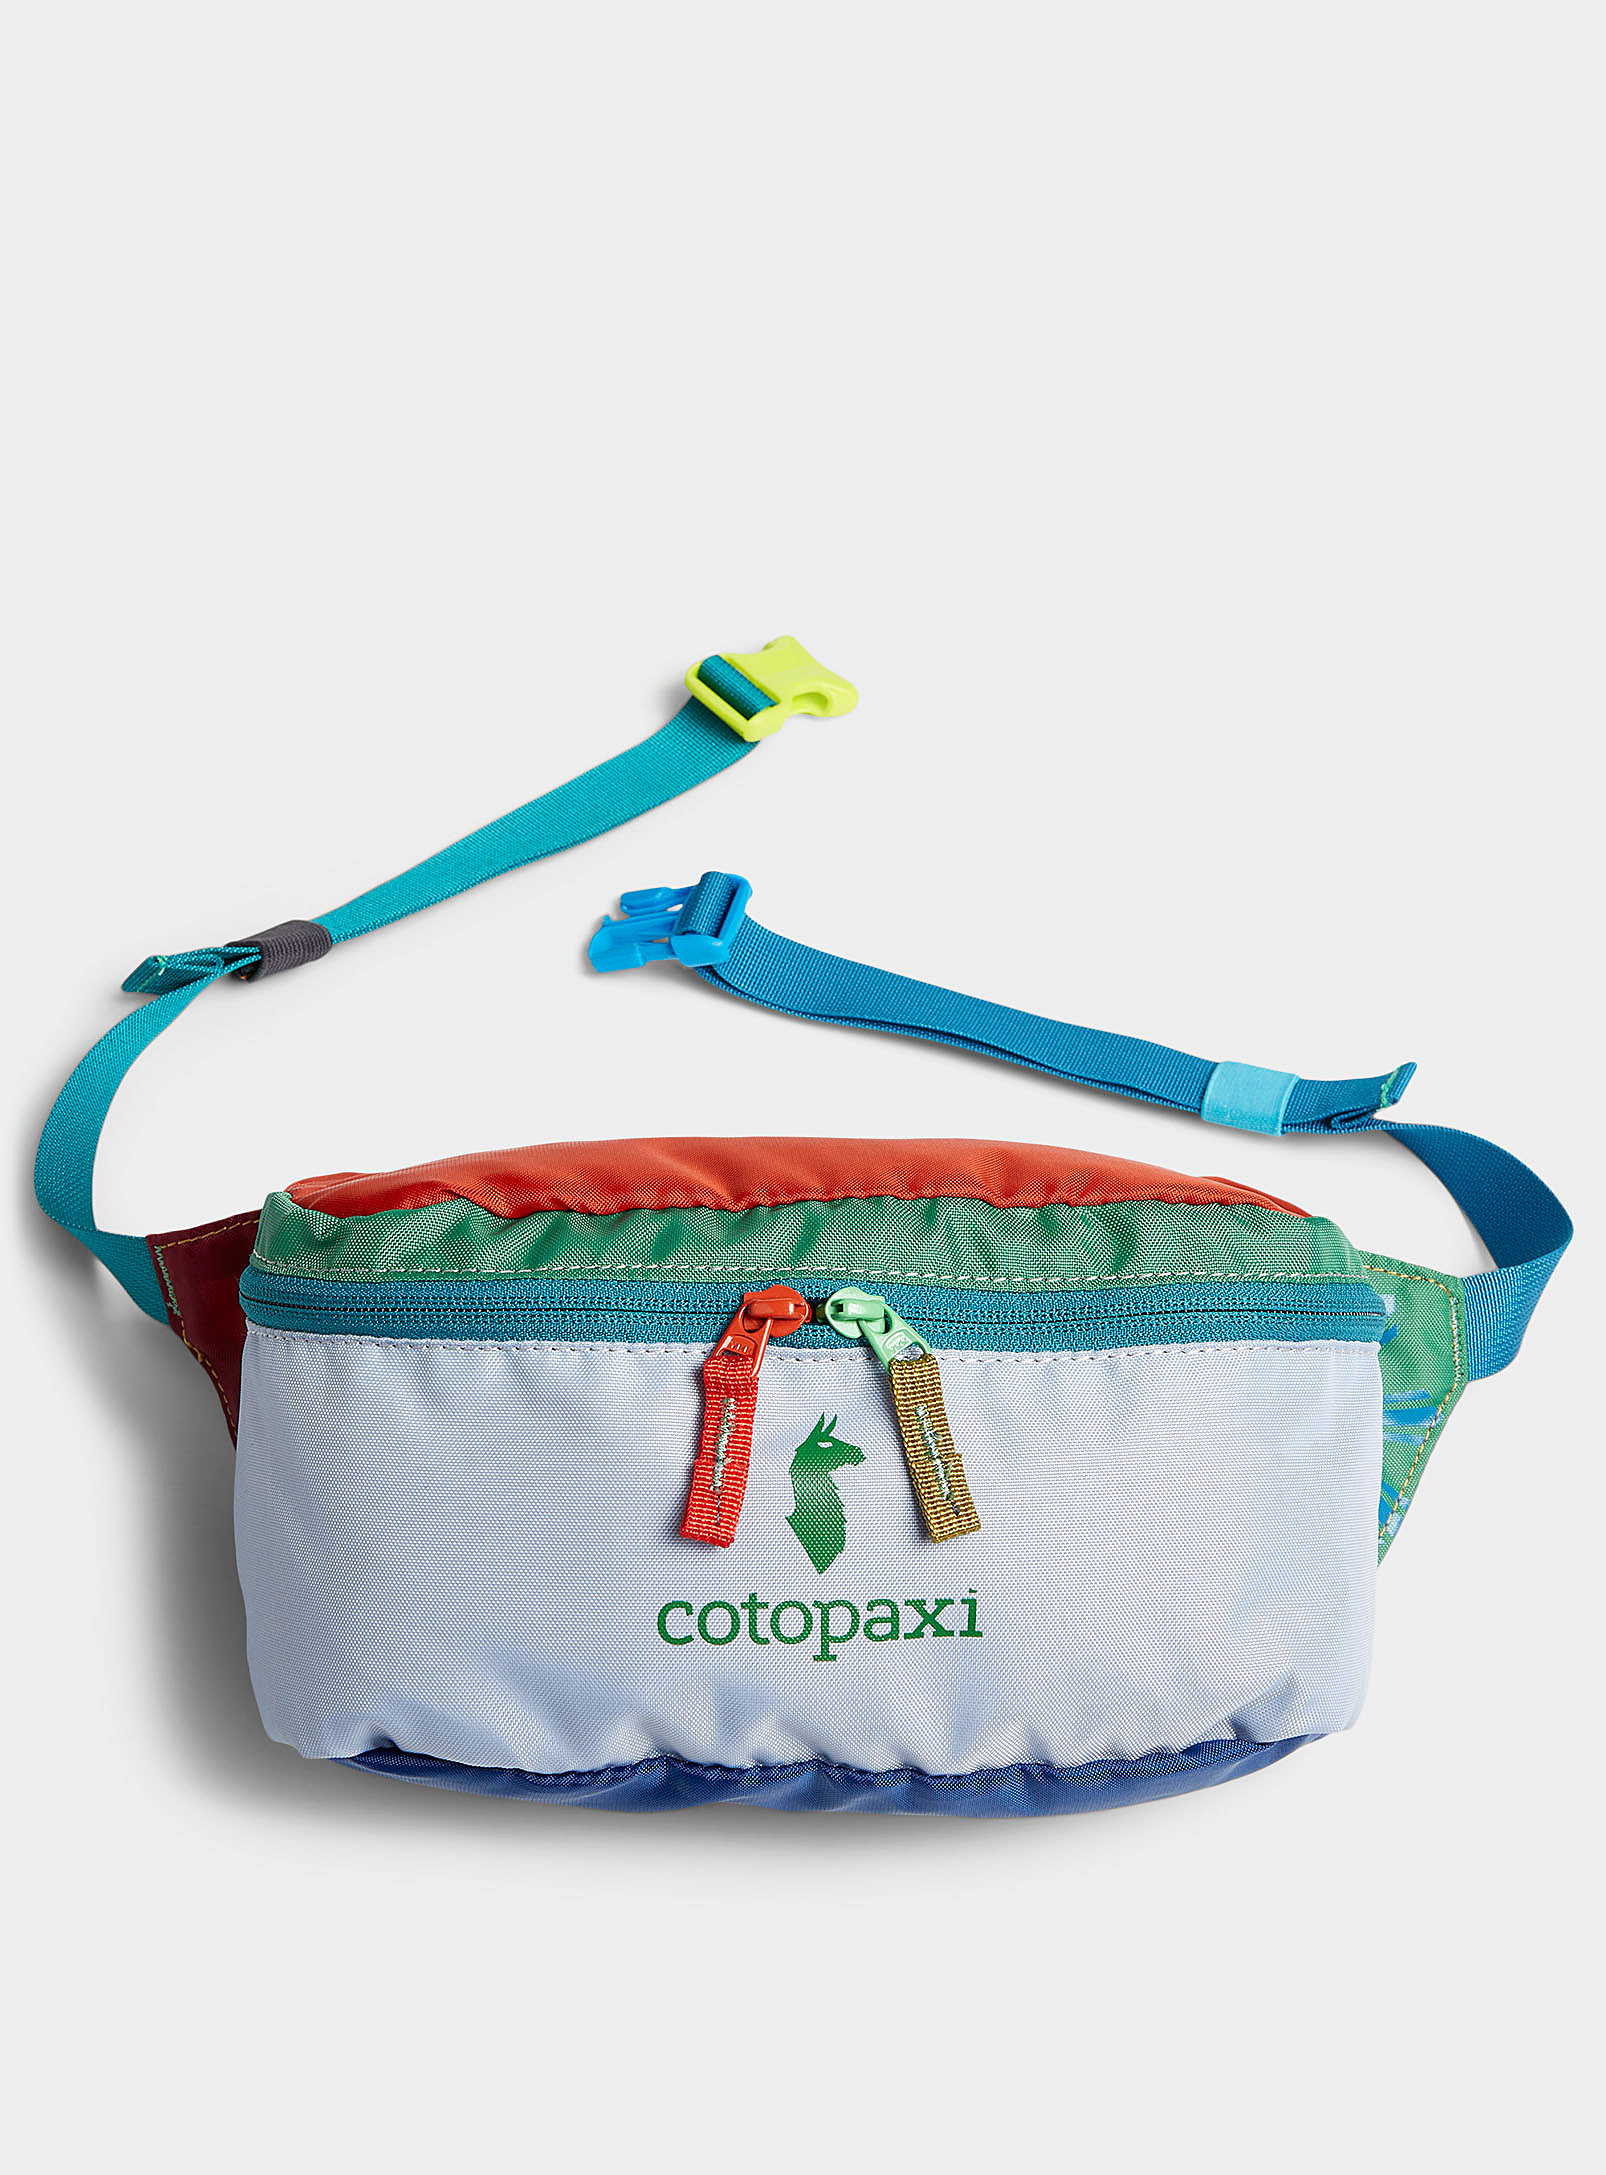 Cotopaxi Bataan 3l Fanny Pack In Assorted